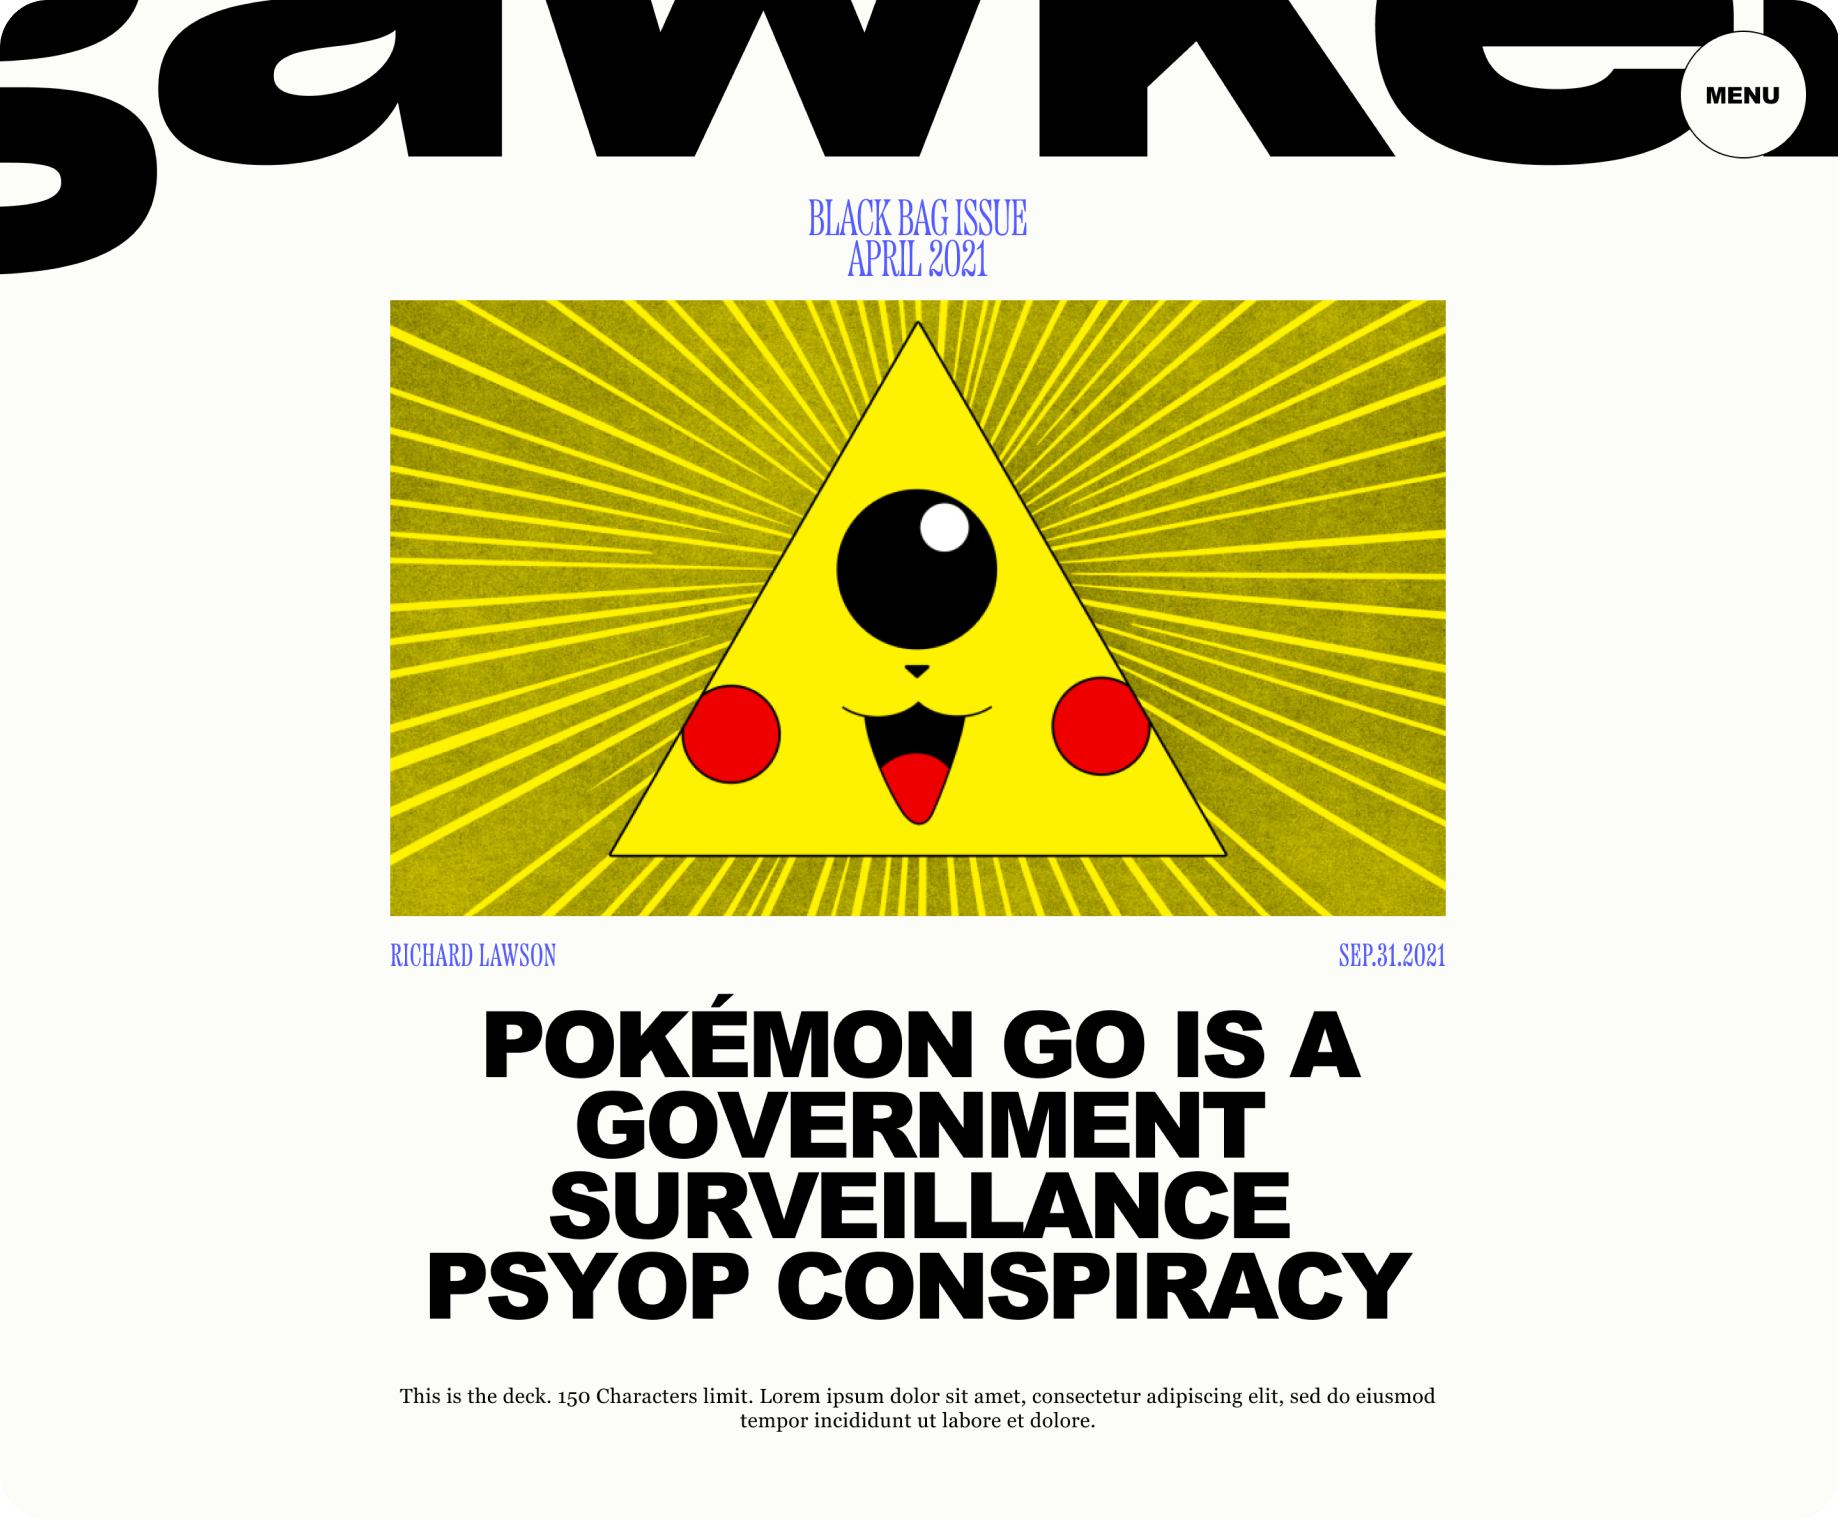 Gawker_Feature_Article-1